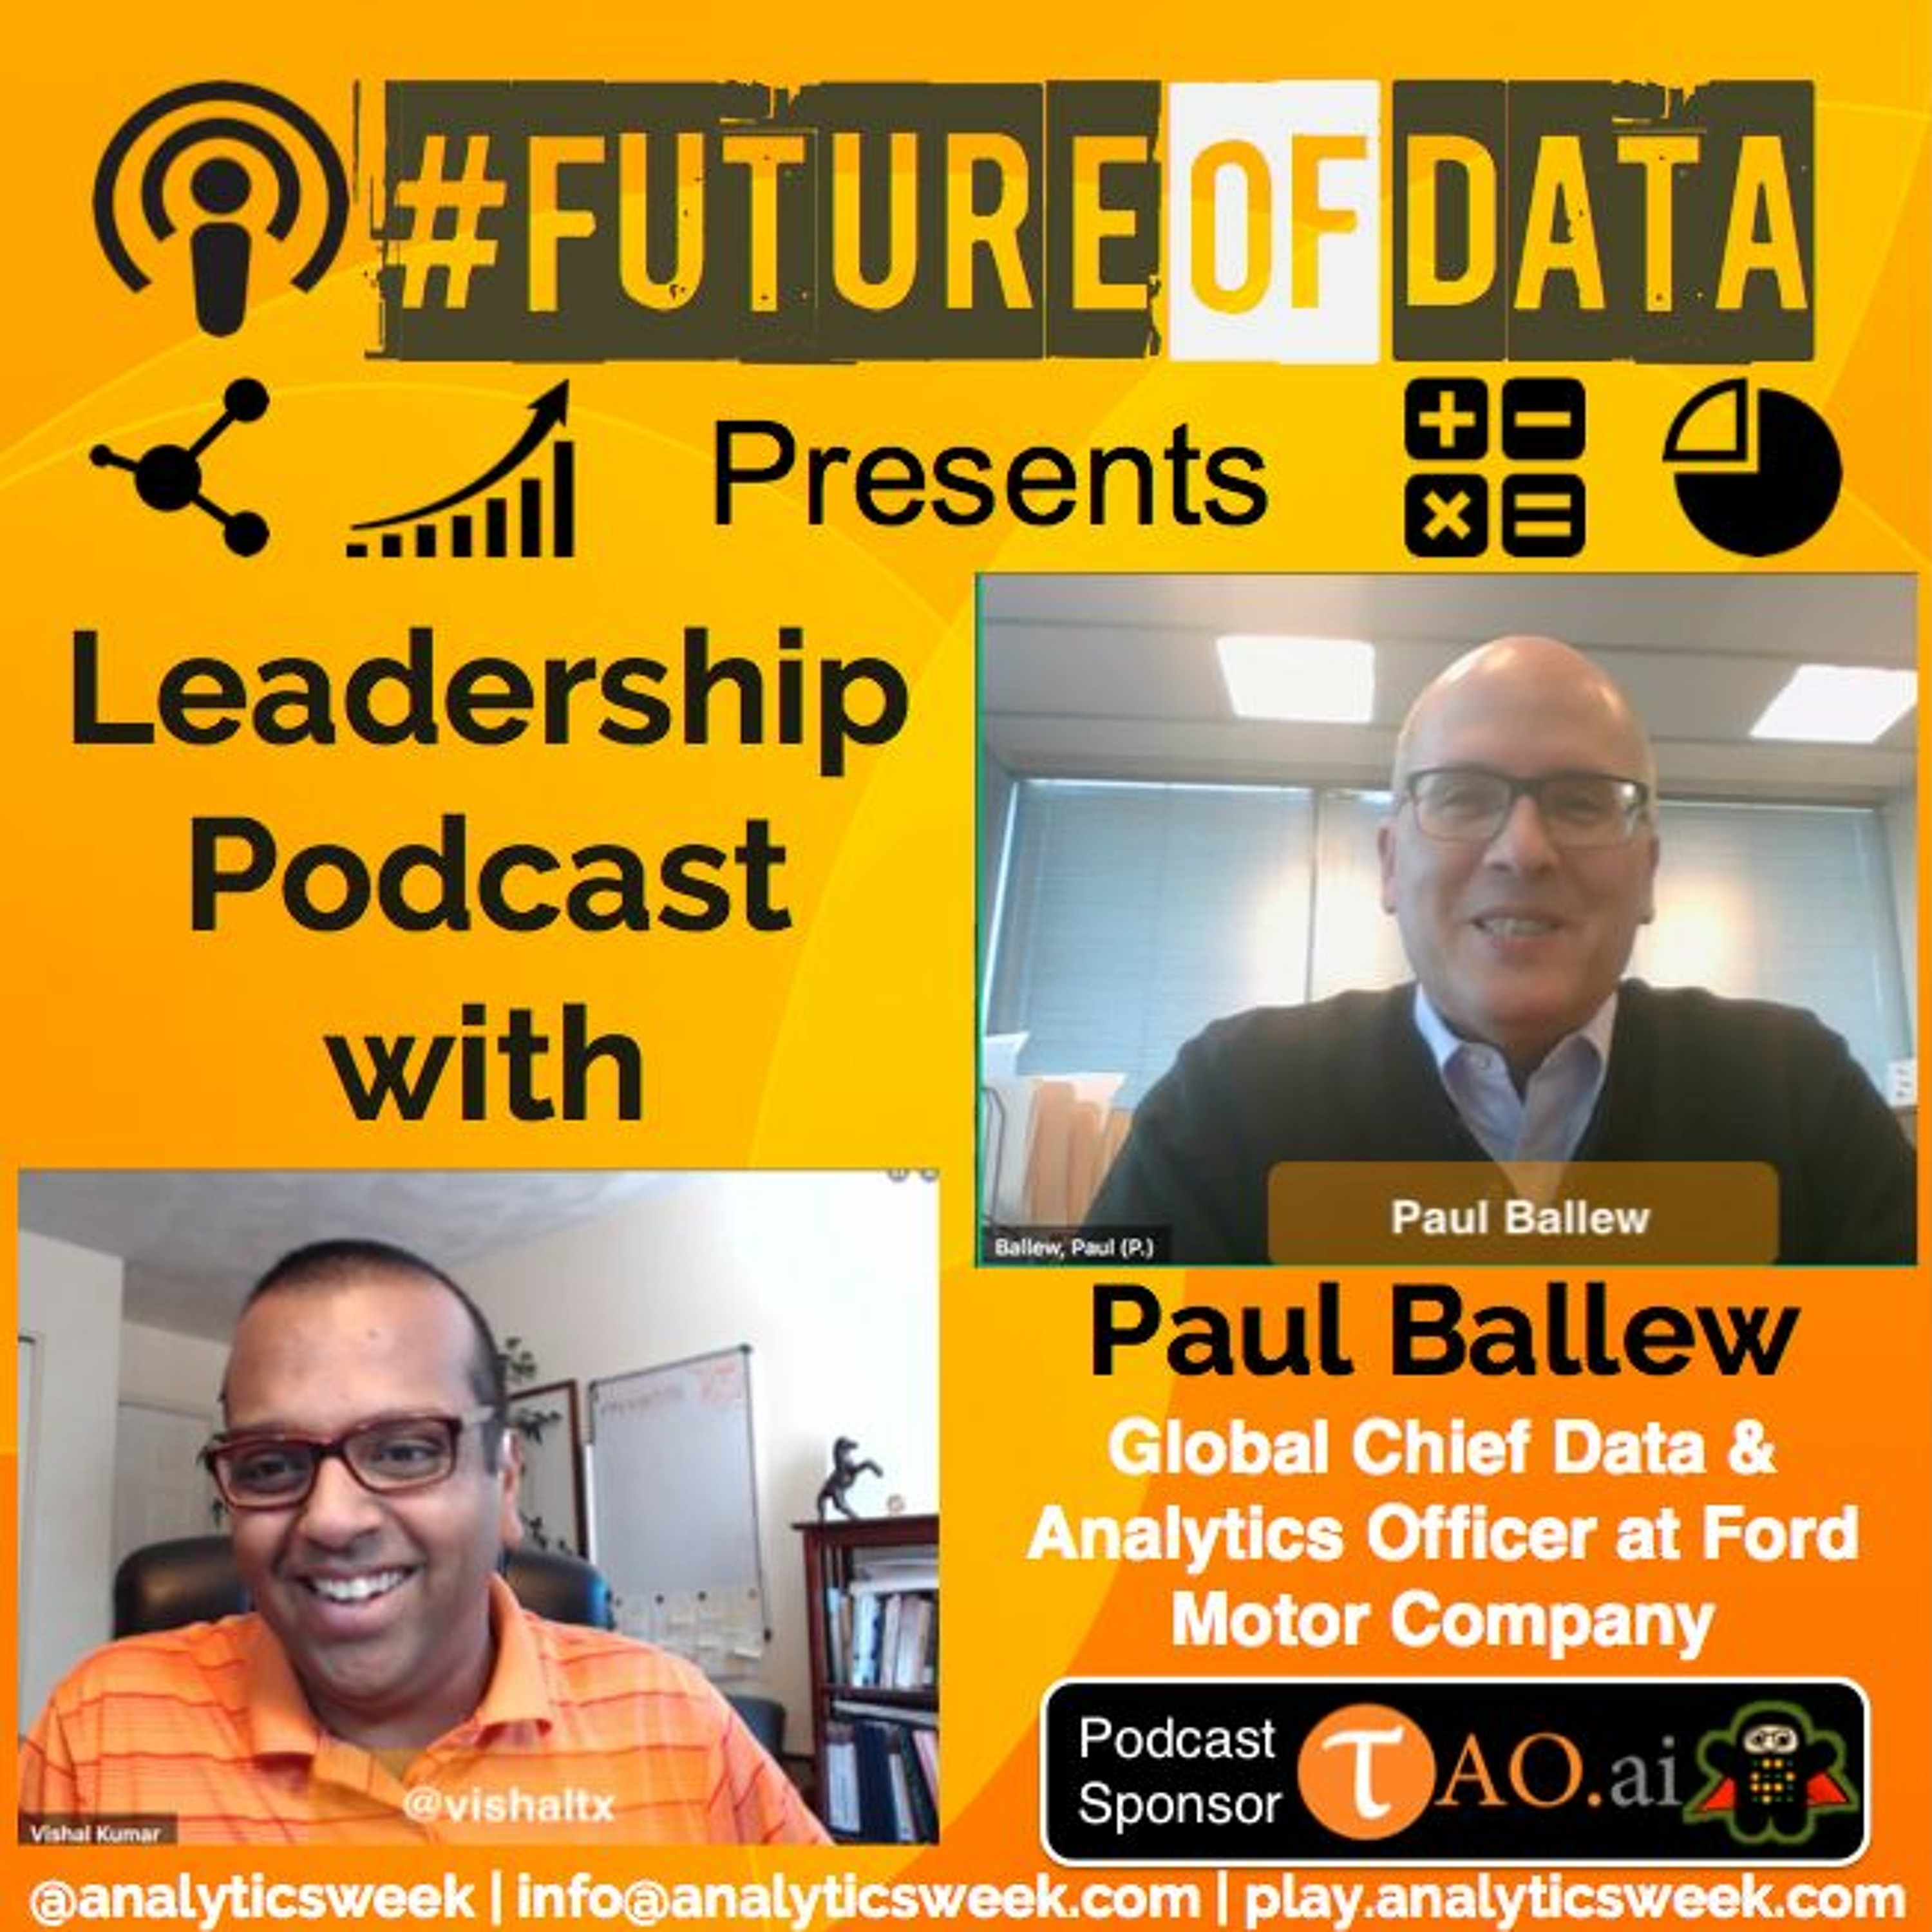 Paul Ballew(@Ford) on running global data science group #FutureOfData #Podcast